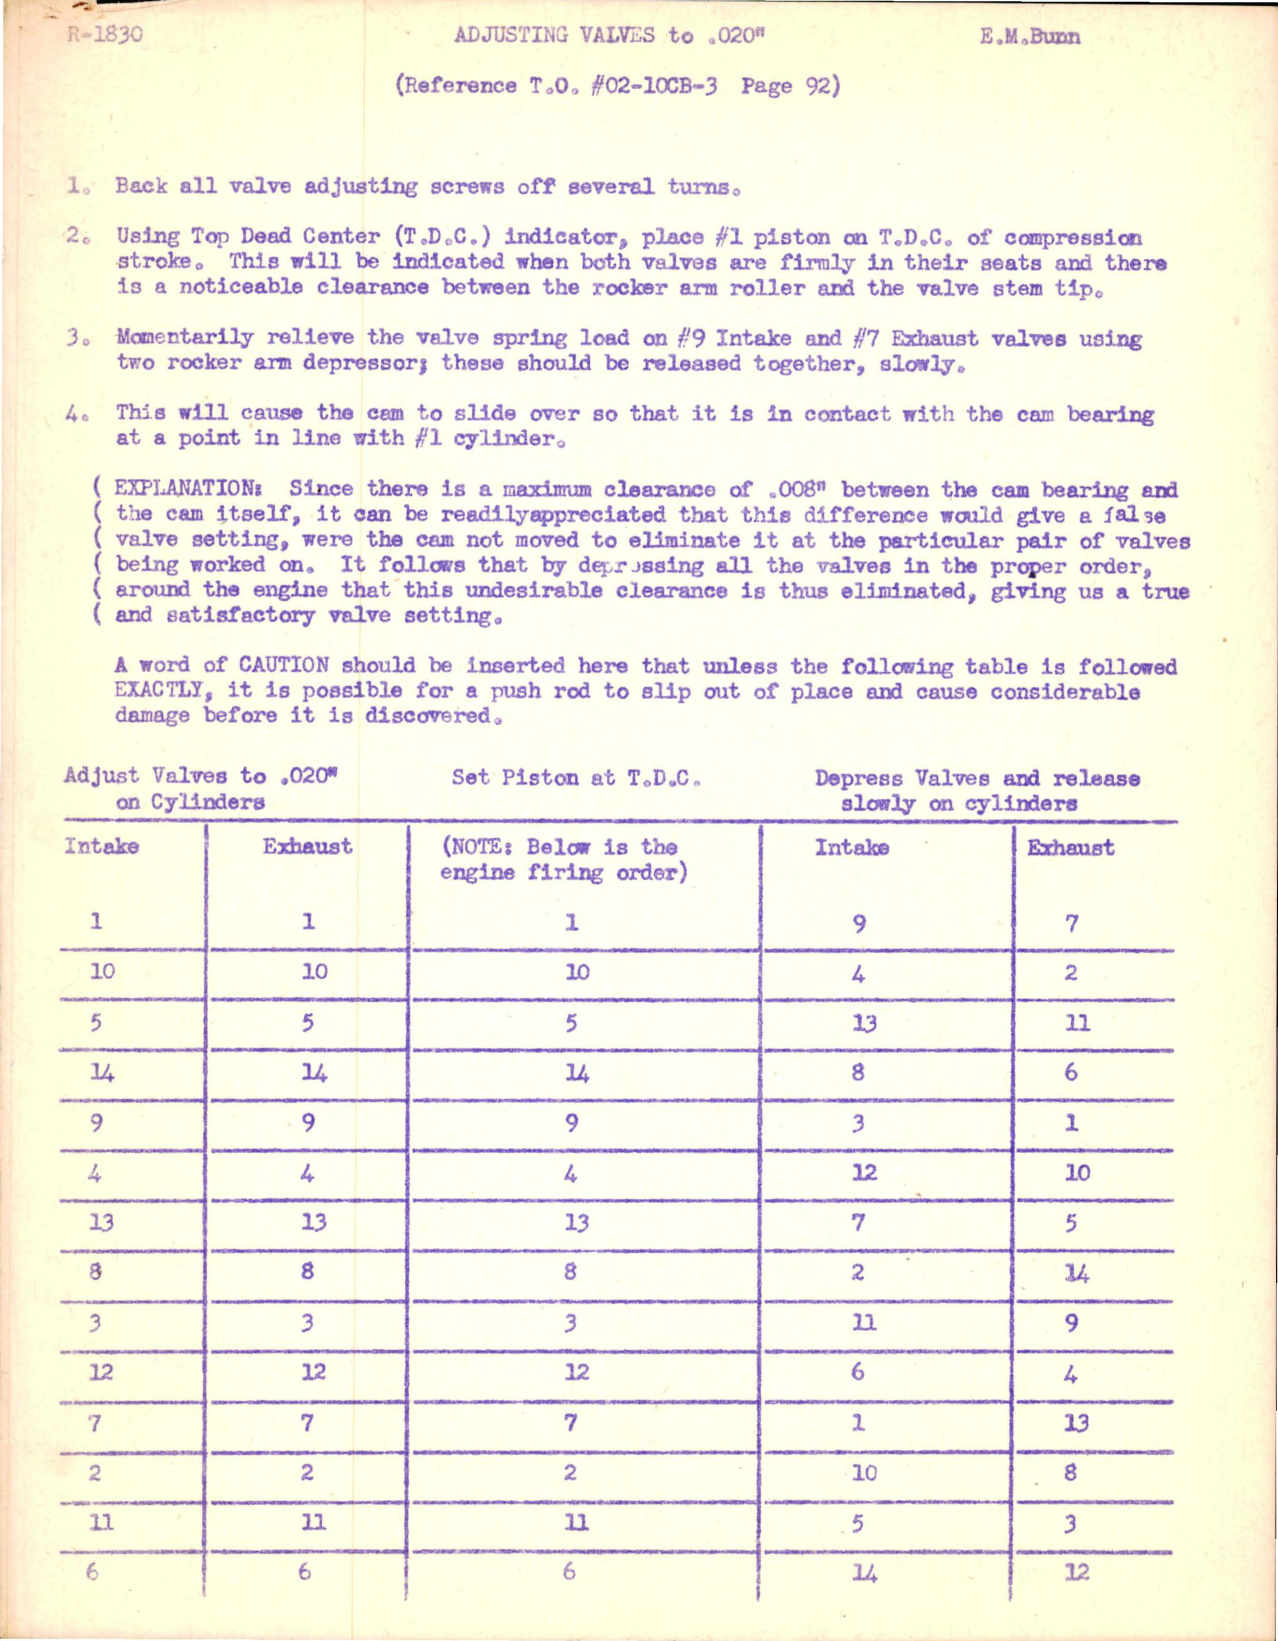 Sample page 1 from AirCorps Library document: Adjusting Valves to .020 for R-1830